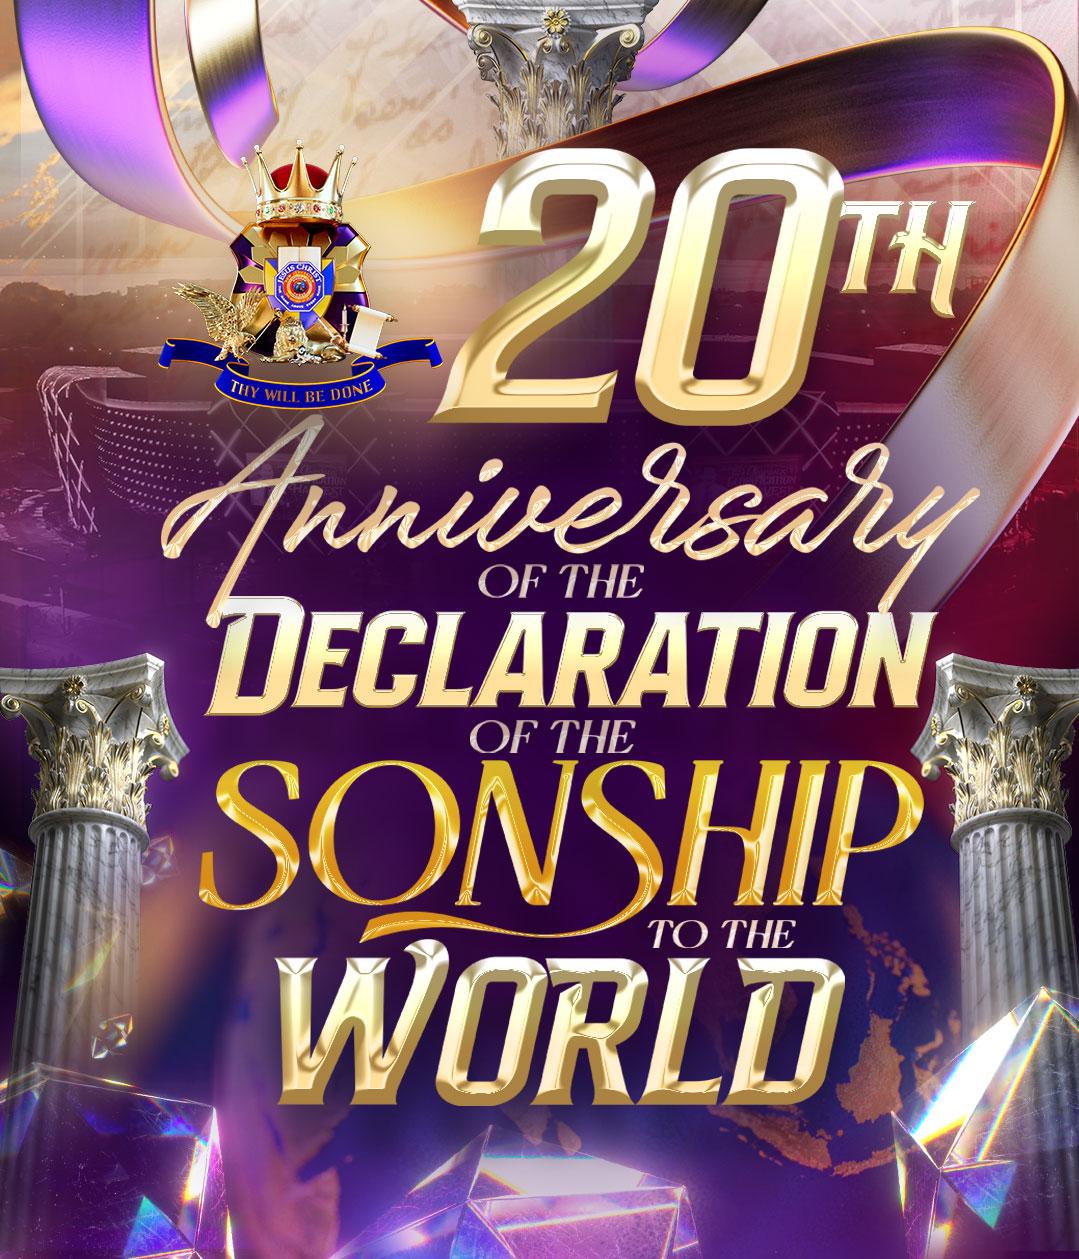 20 Years of Celebrating the Declaration of the Sonship to the World